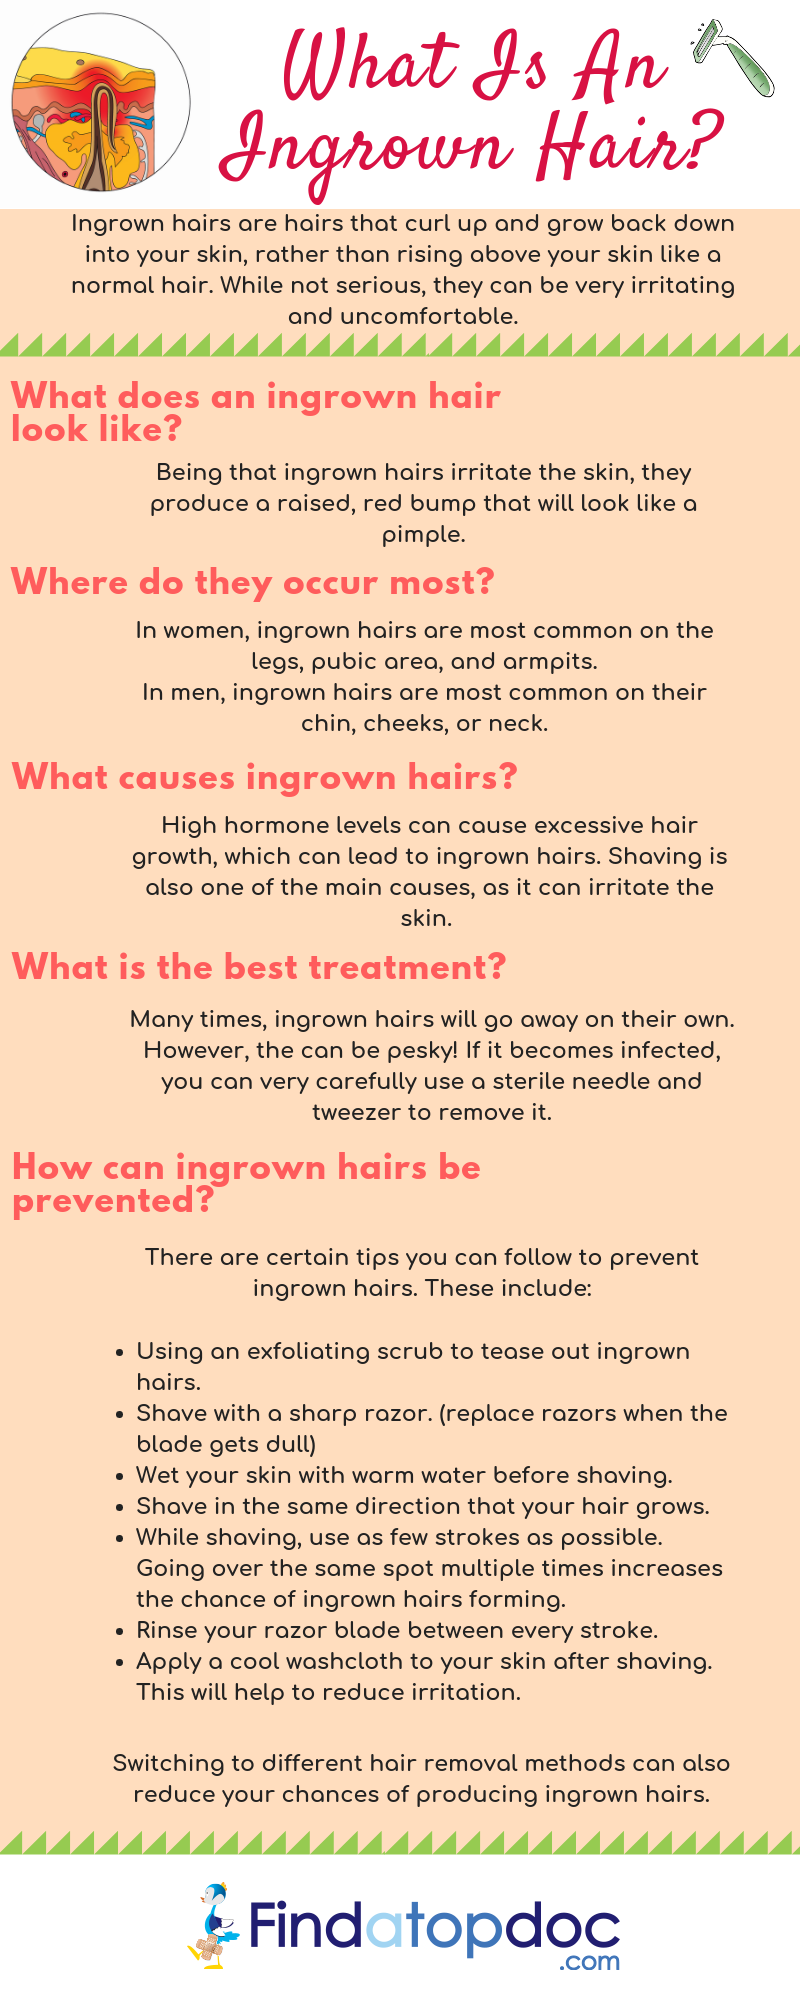 What are the Signs and Symptoms of an Ingrown Hair?